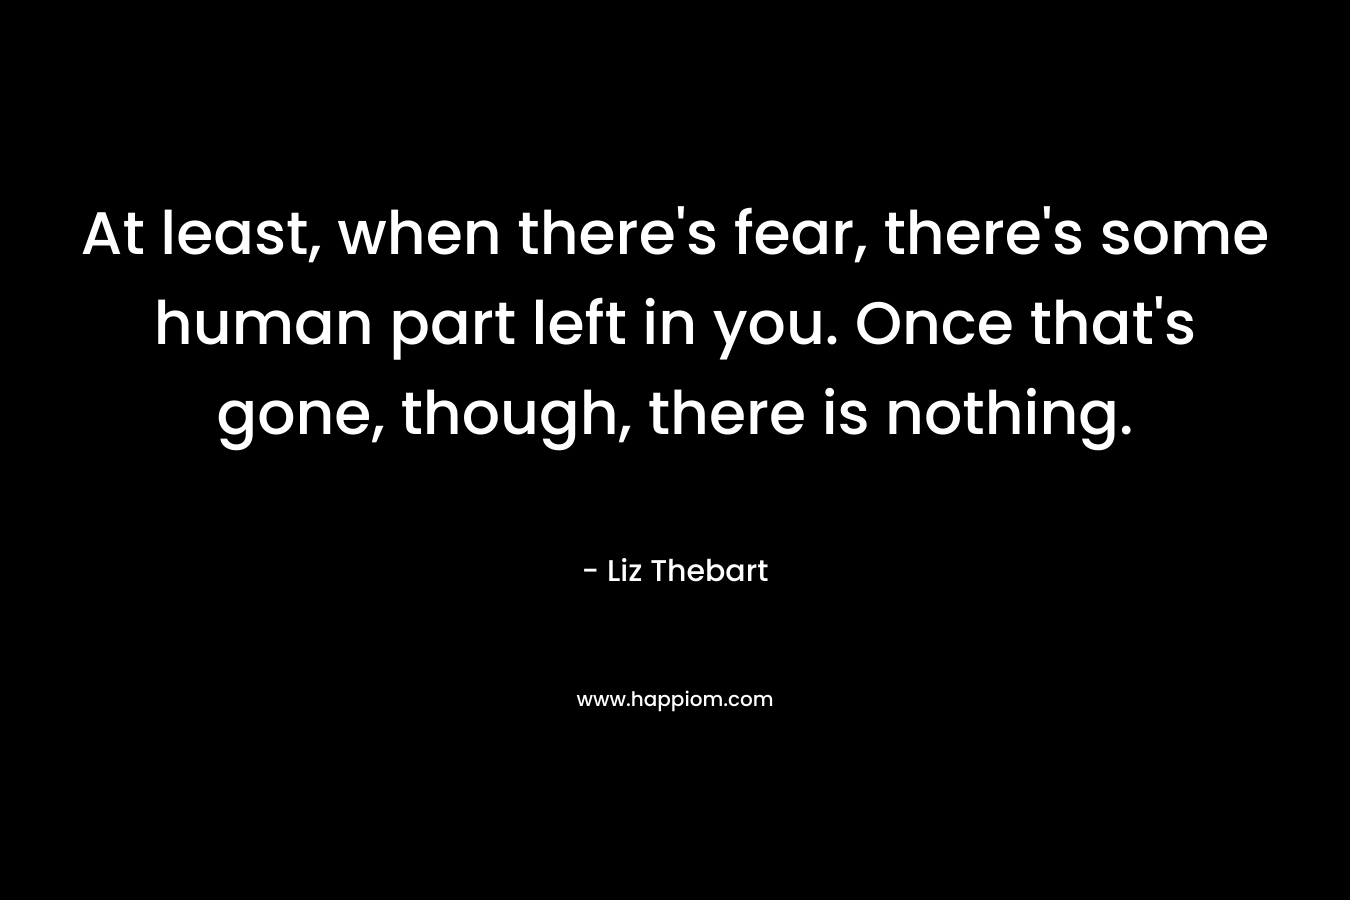 At least, when there's fear, there's some human part left in you. Once that's gone, though, there is nothing.